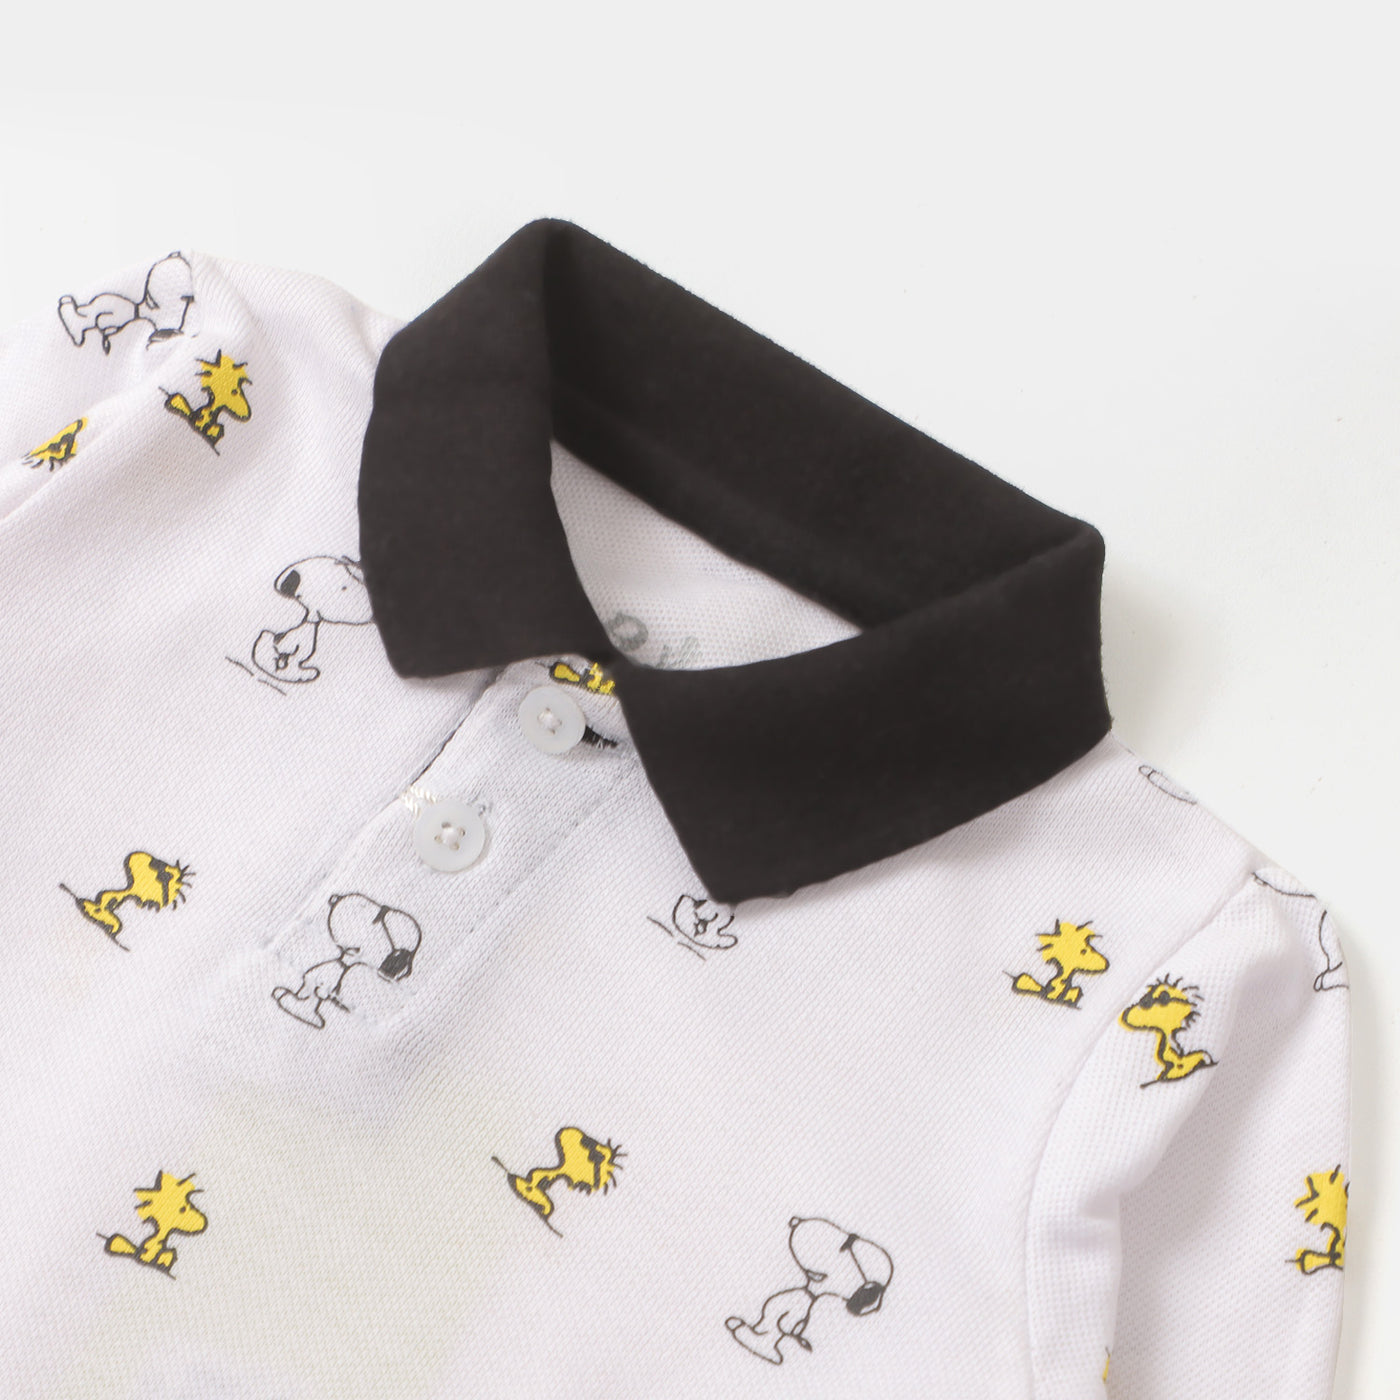 Infant Boys Polo Shirt F/S Character - White